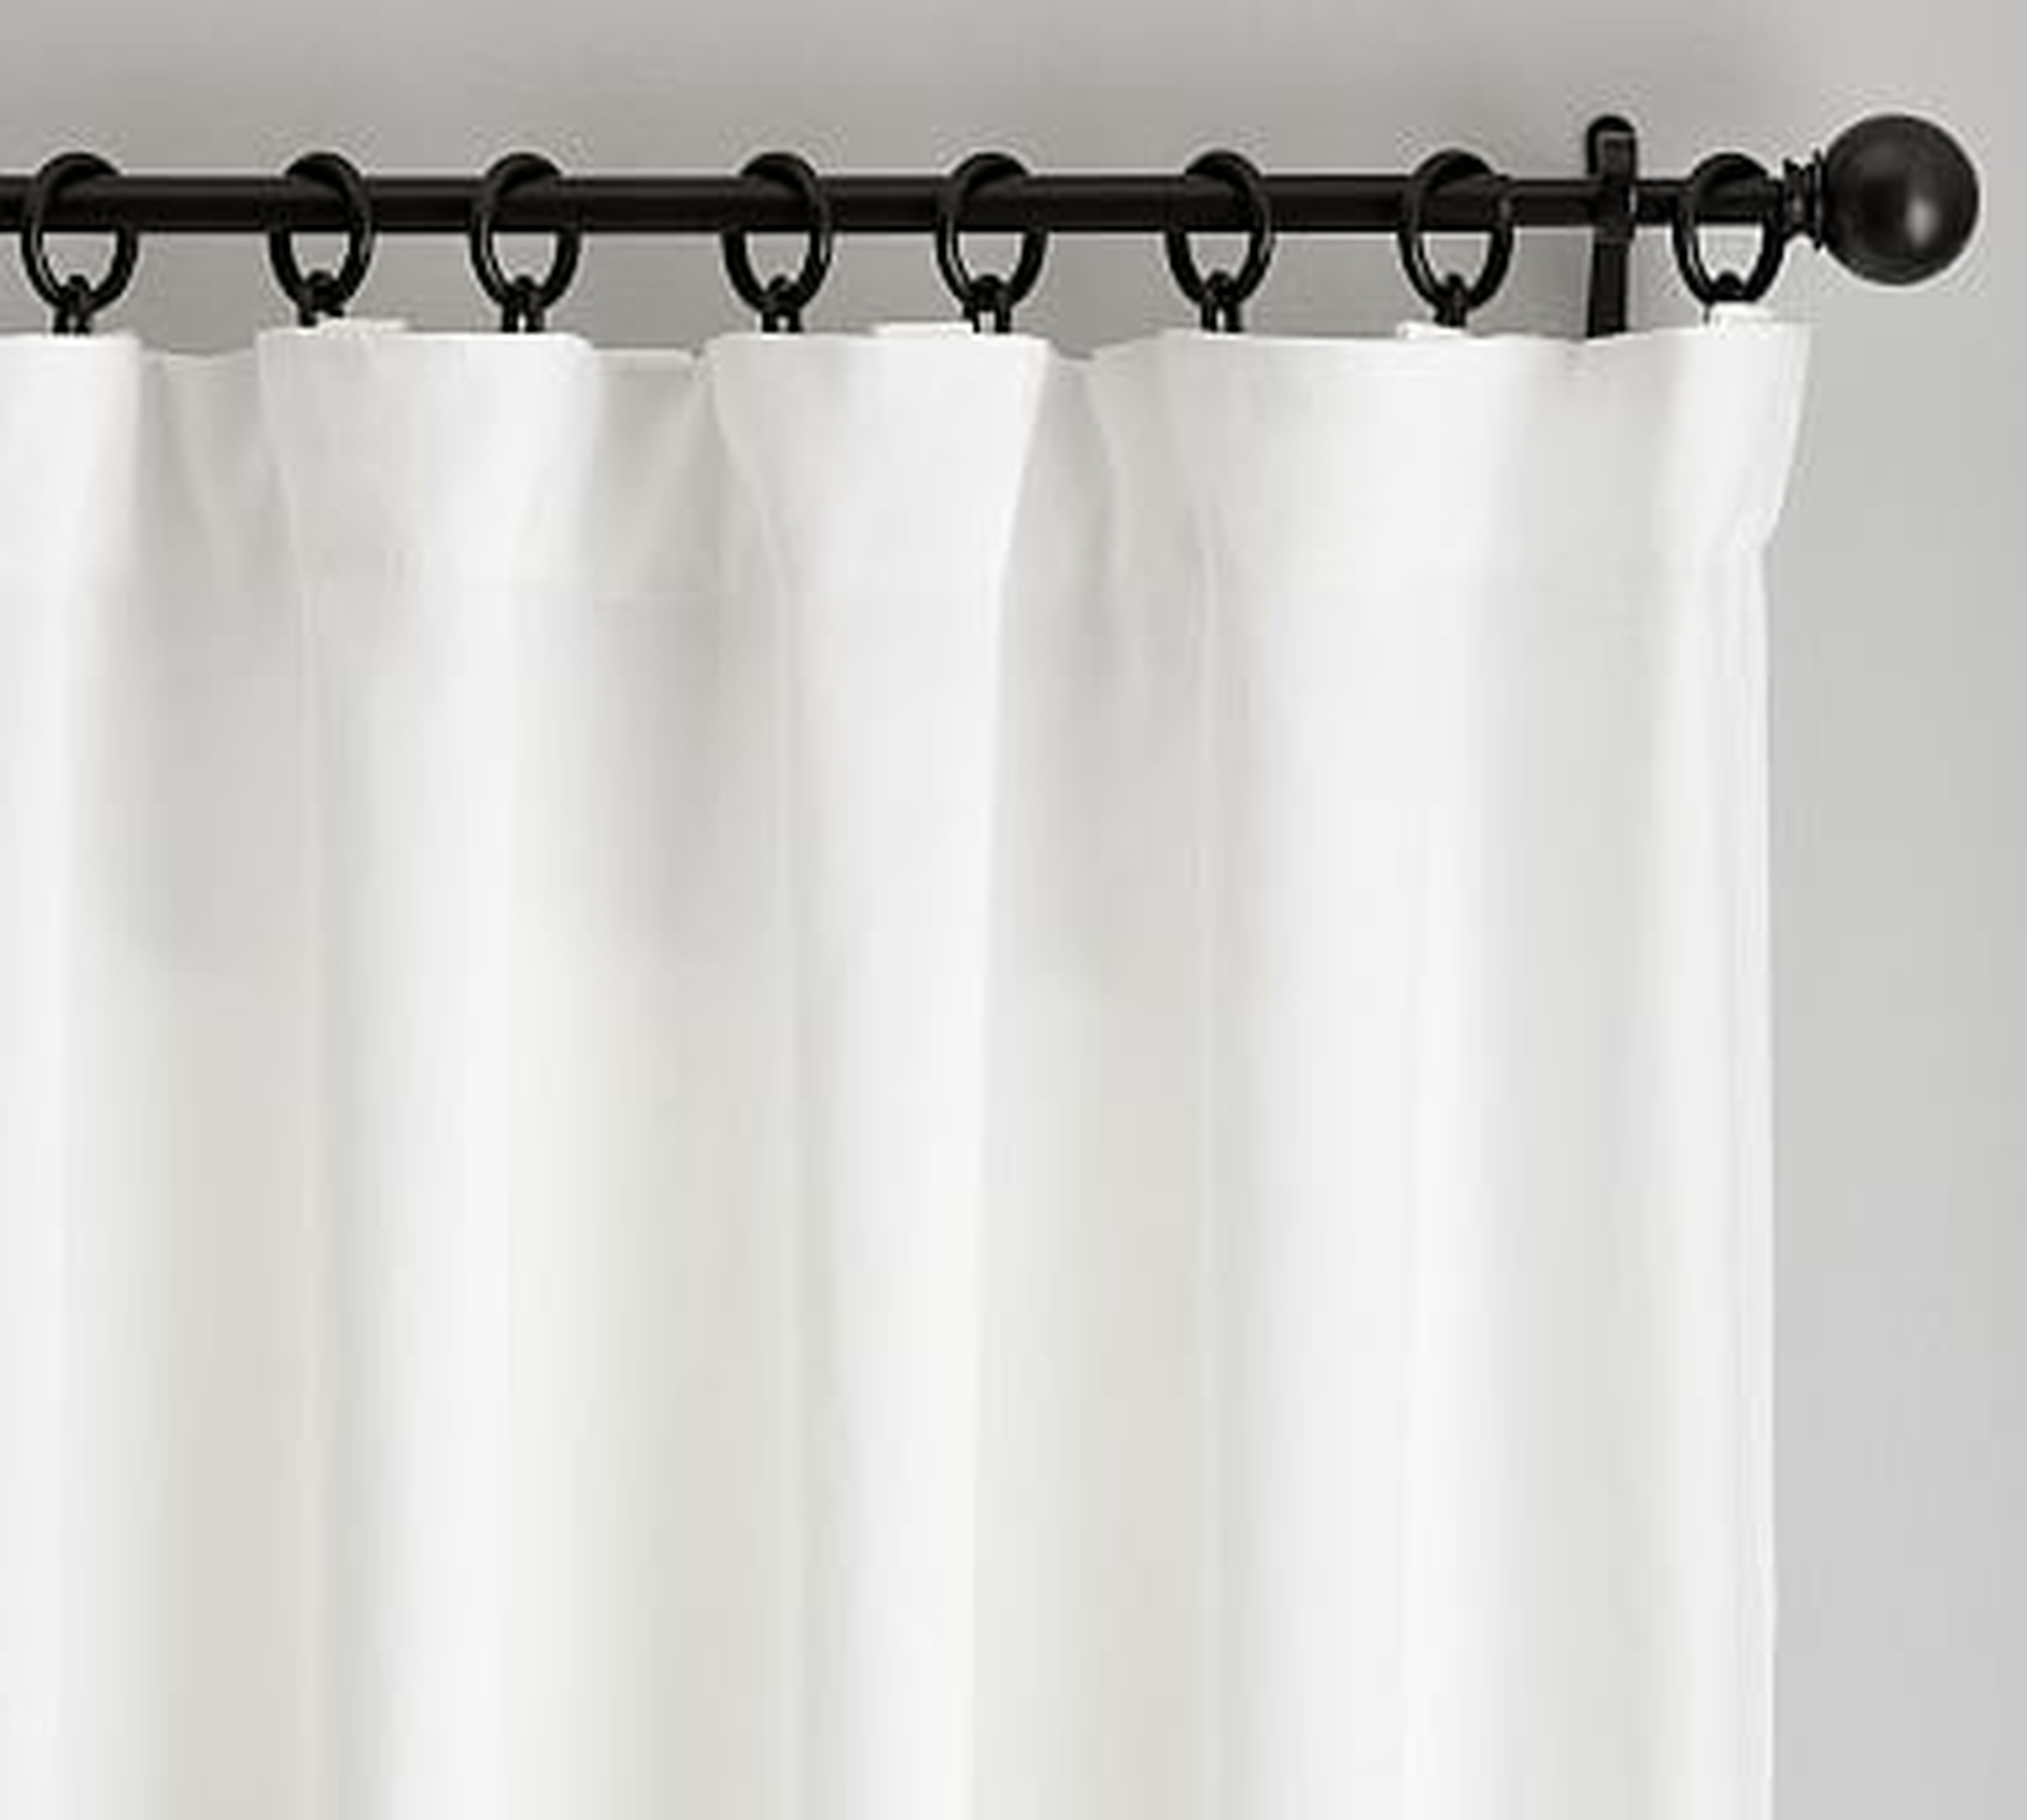 Belgian Flax Linen Curtain, Cotton Lining, 50 x 84", White - Pottery Barn